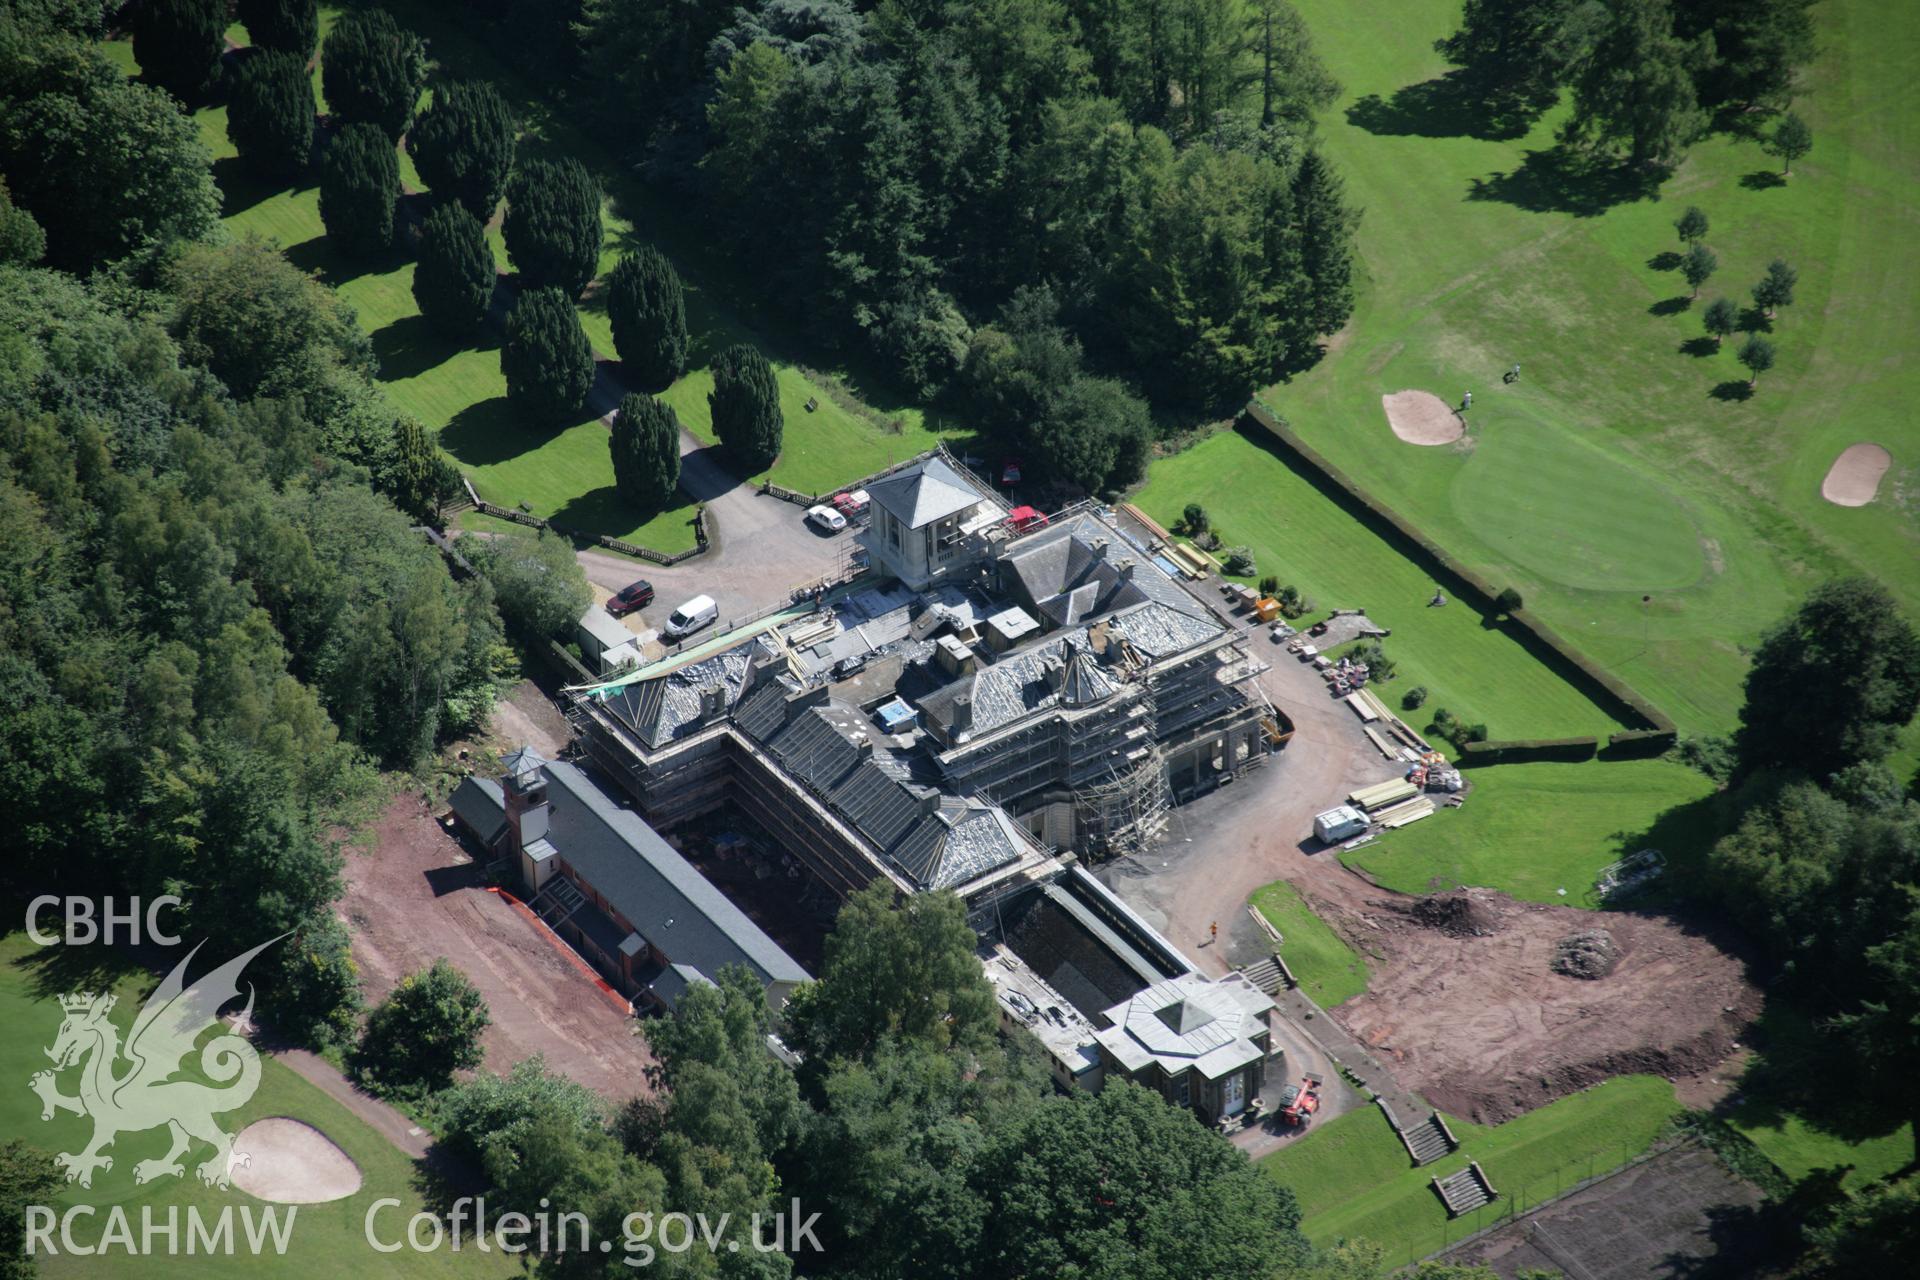 RCAHMW colour oblique aerial photograph of Penoyre Country House viewed from the north-west. Taken on 02 September 2005 by Toby Driver